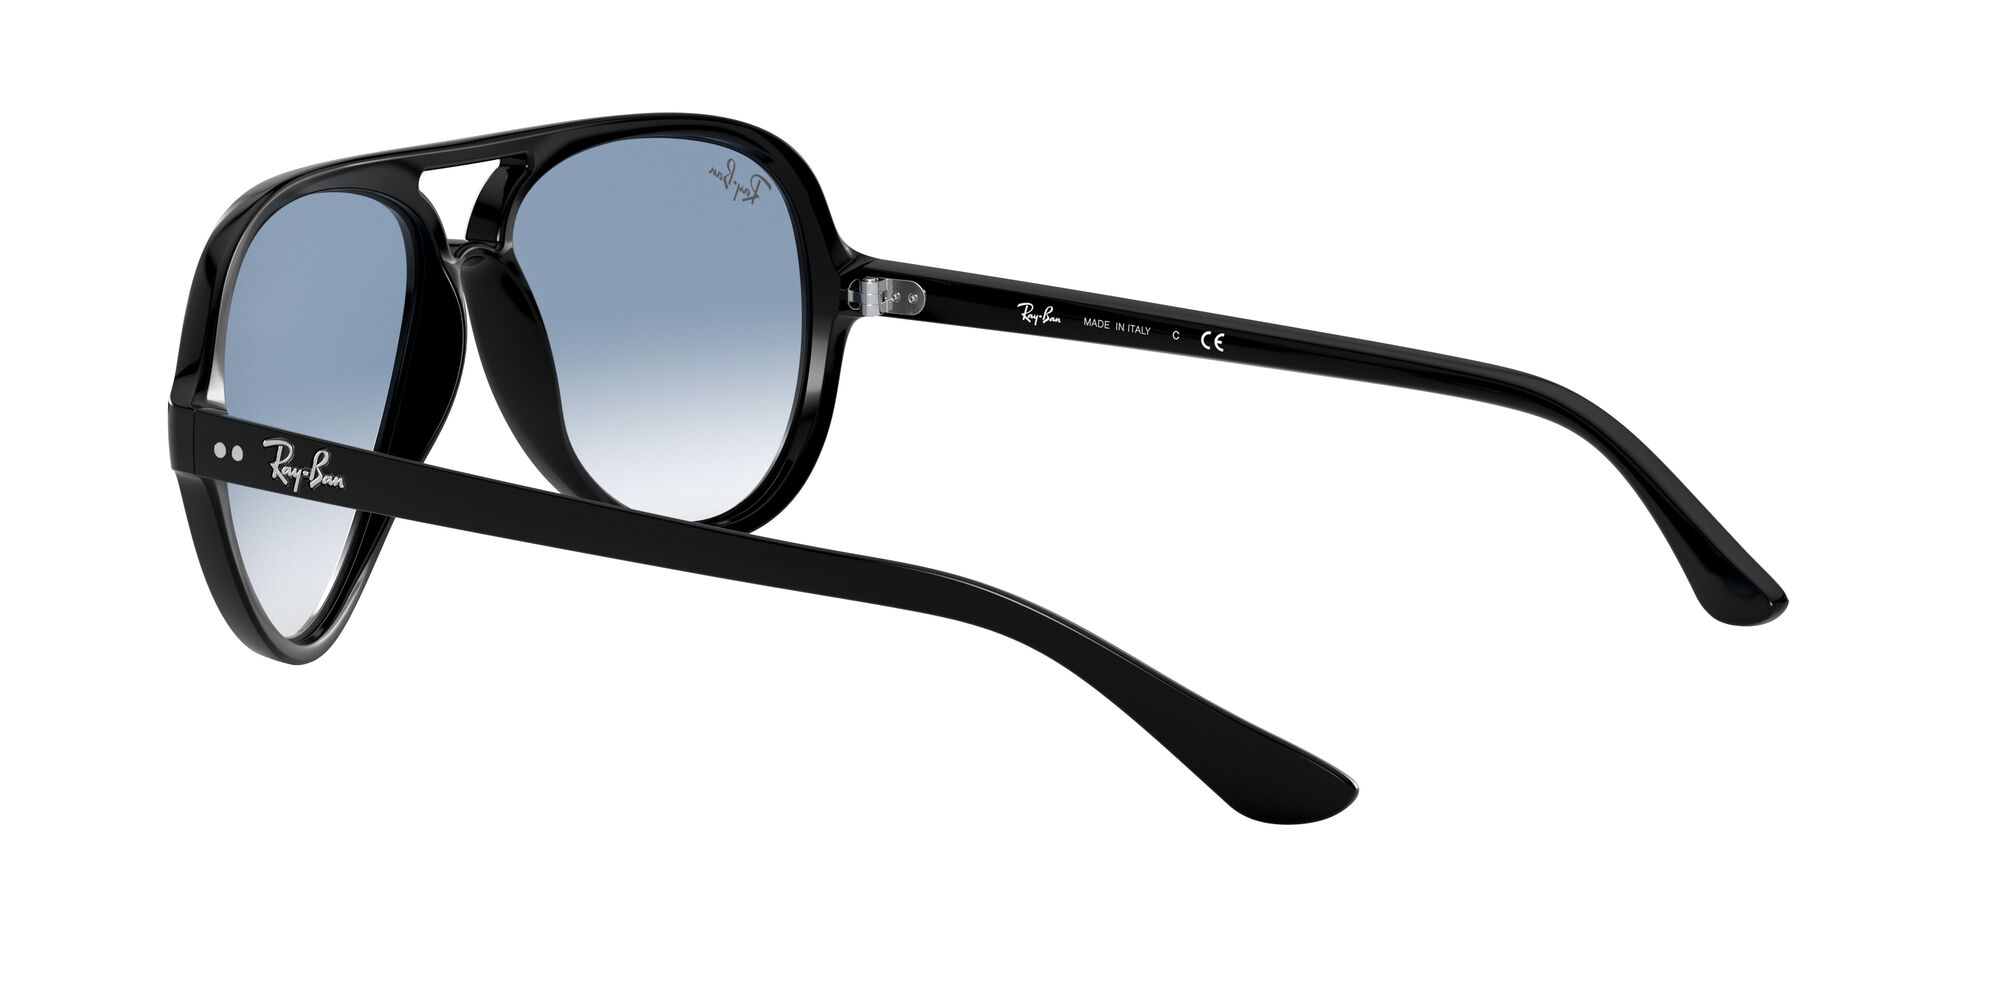 Ray-Ban RB4125 Cats 5000 Sunglasses - image 5 of 12